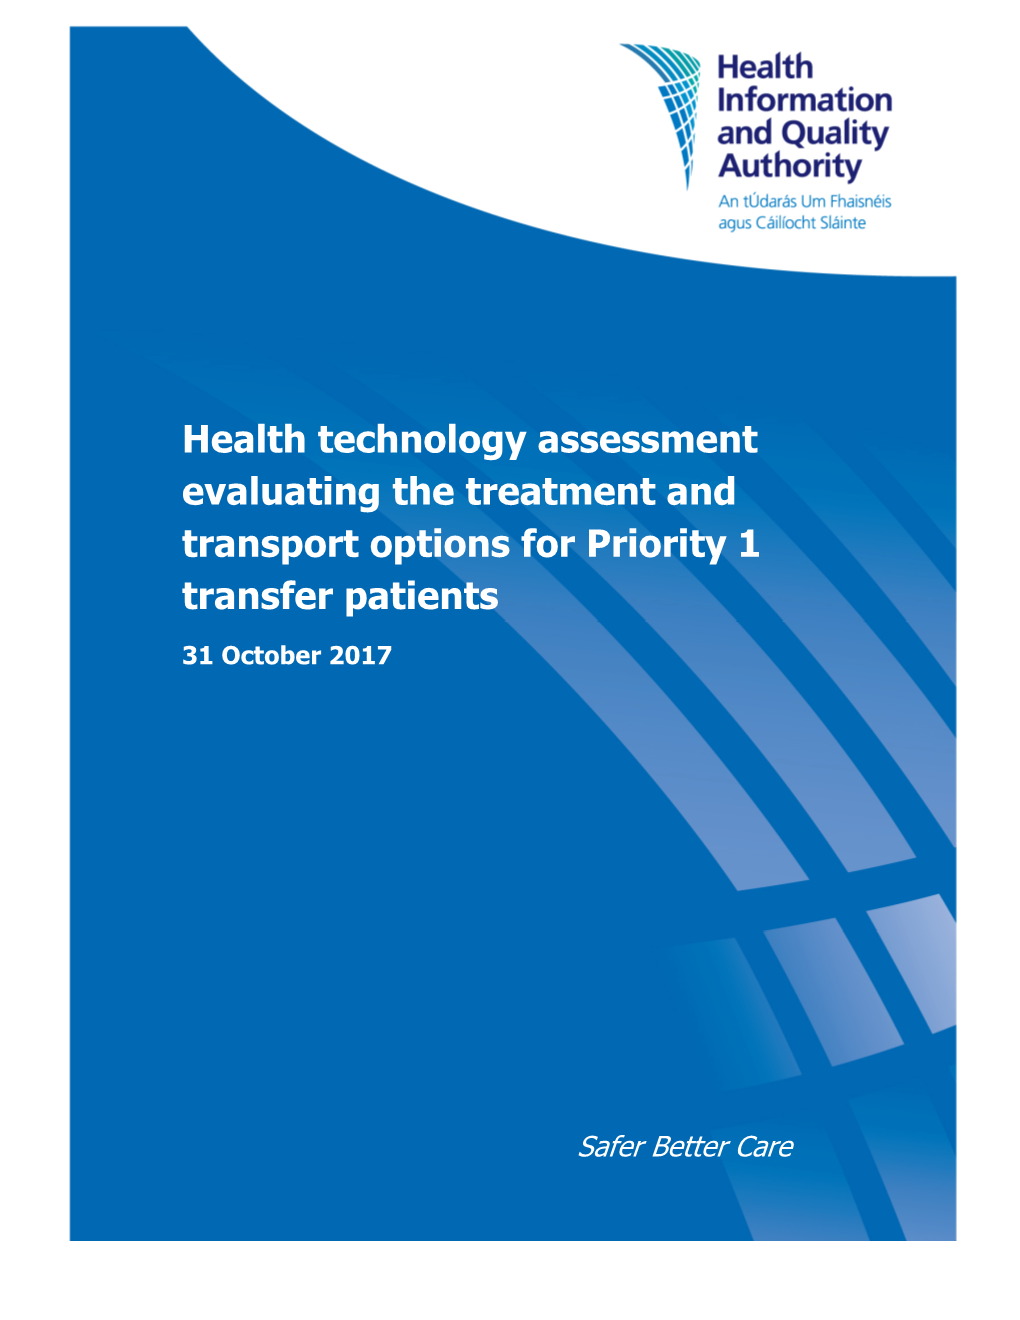 Health Technology Assessment Evaluating the Treatment and Transport Options for Priority 1 Transfer Patients